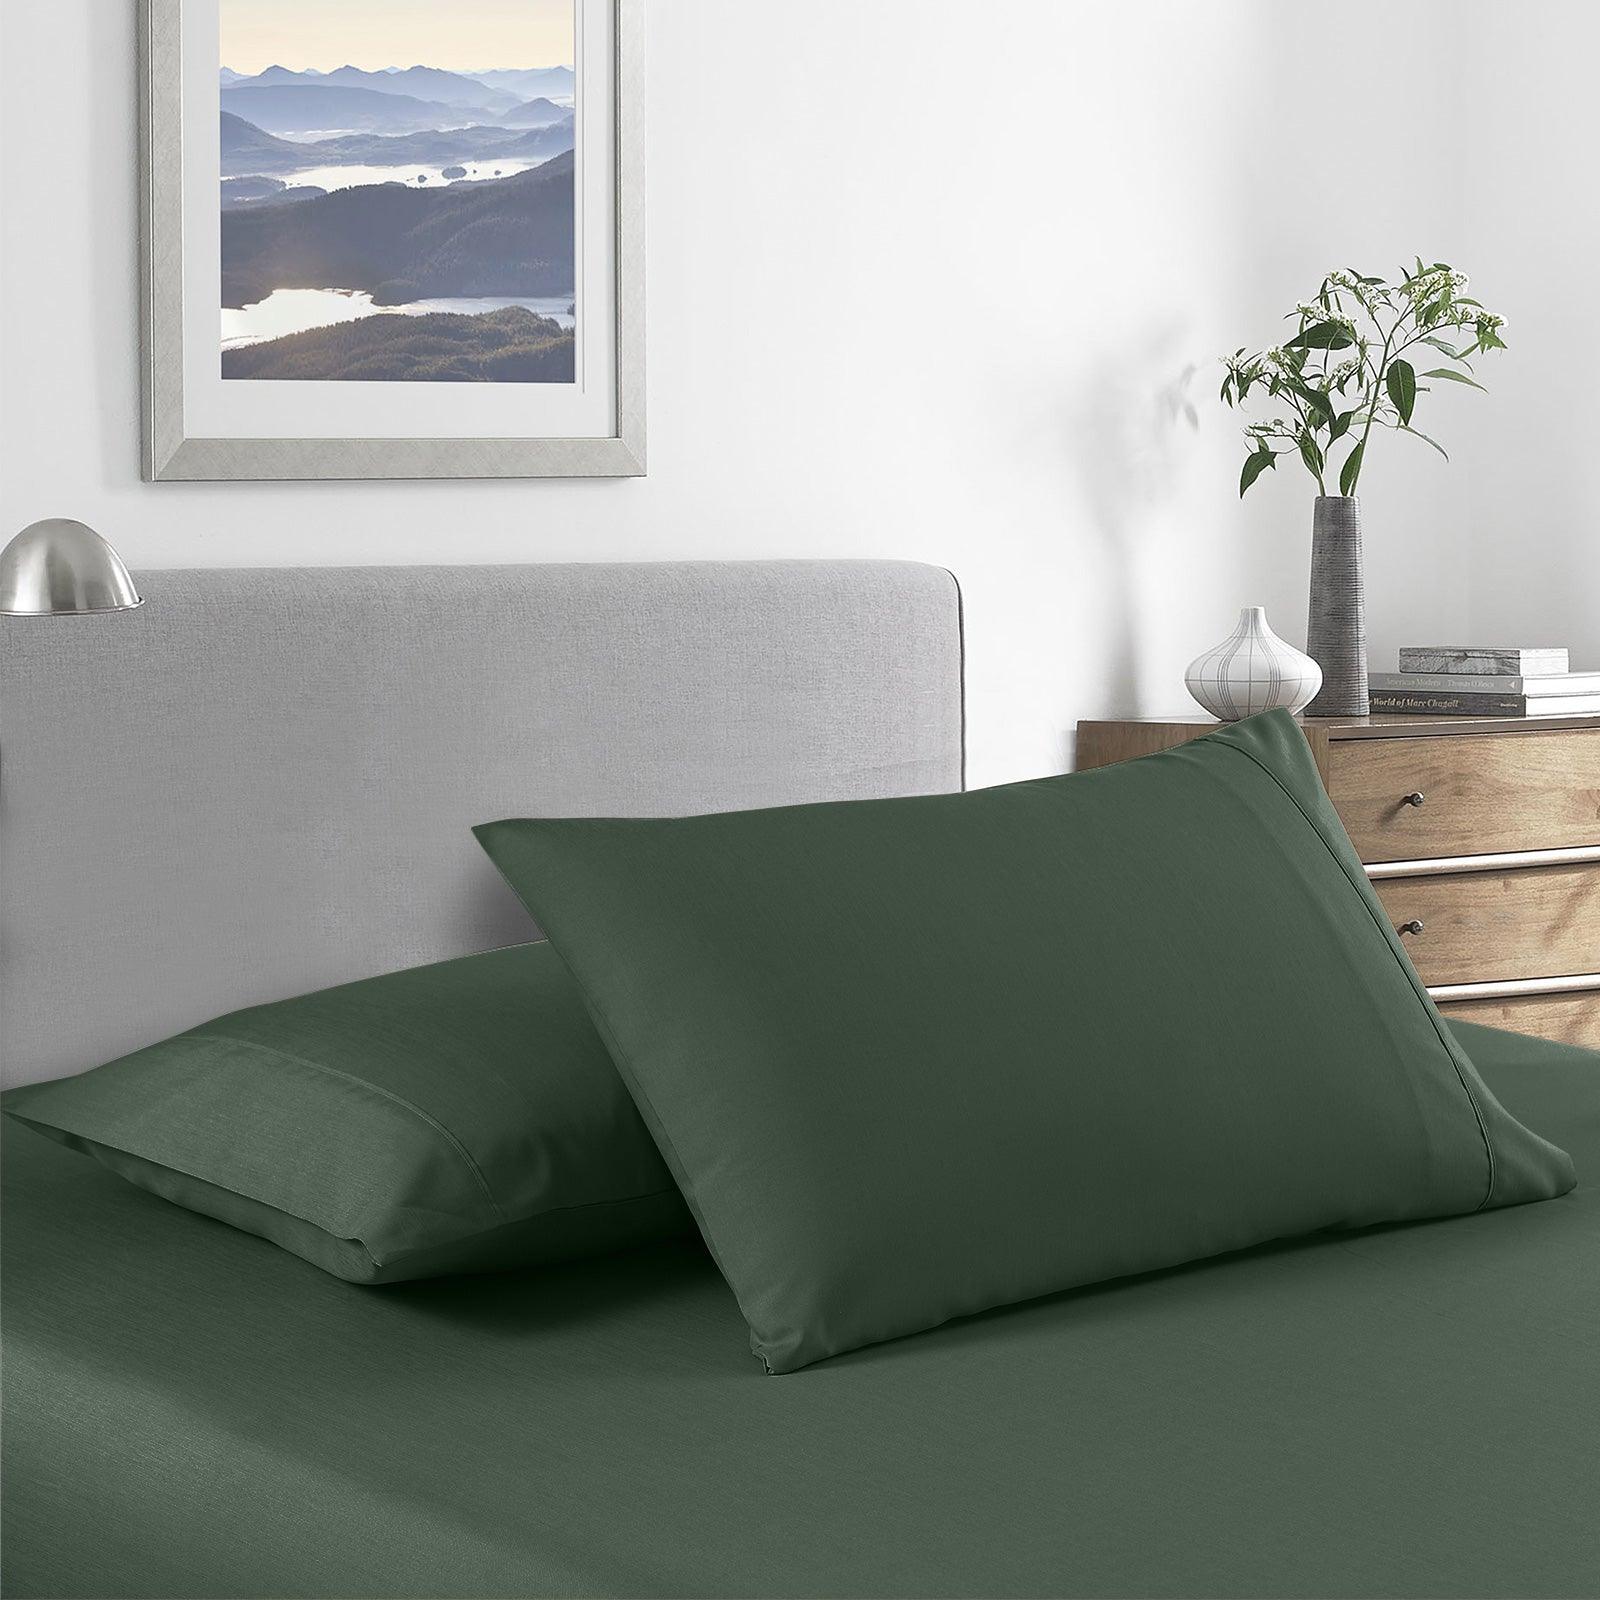 Royal Comfort 2000 Thread Count Bamboo Cooling Sheet Set Ultra Soft Bedding - Queen - Olive